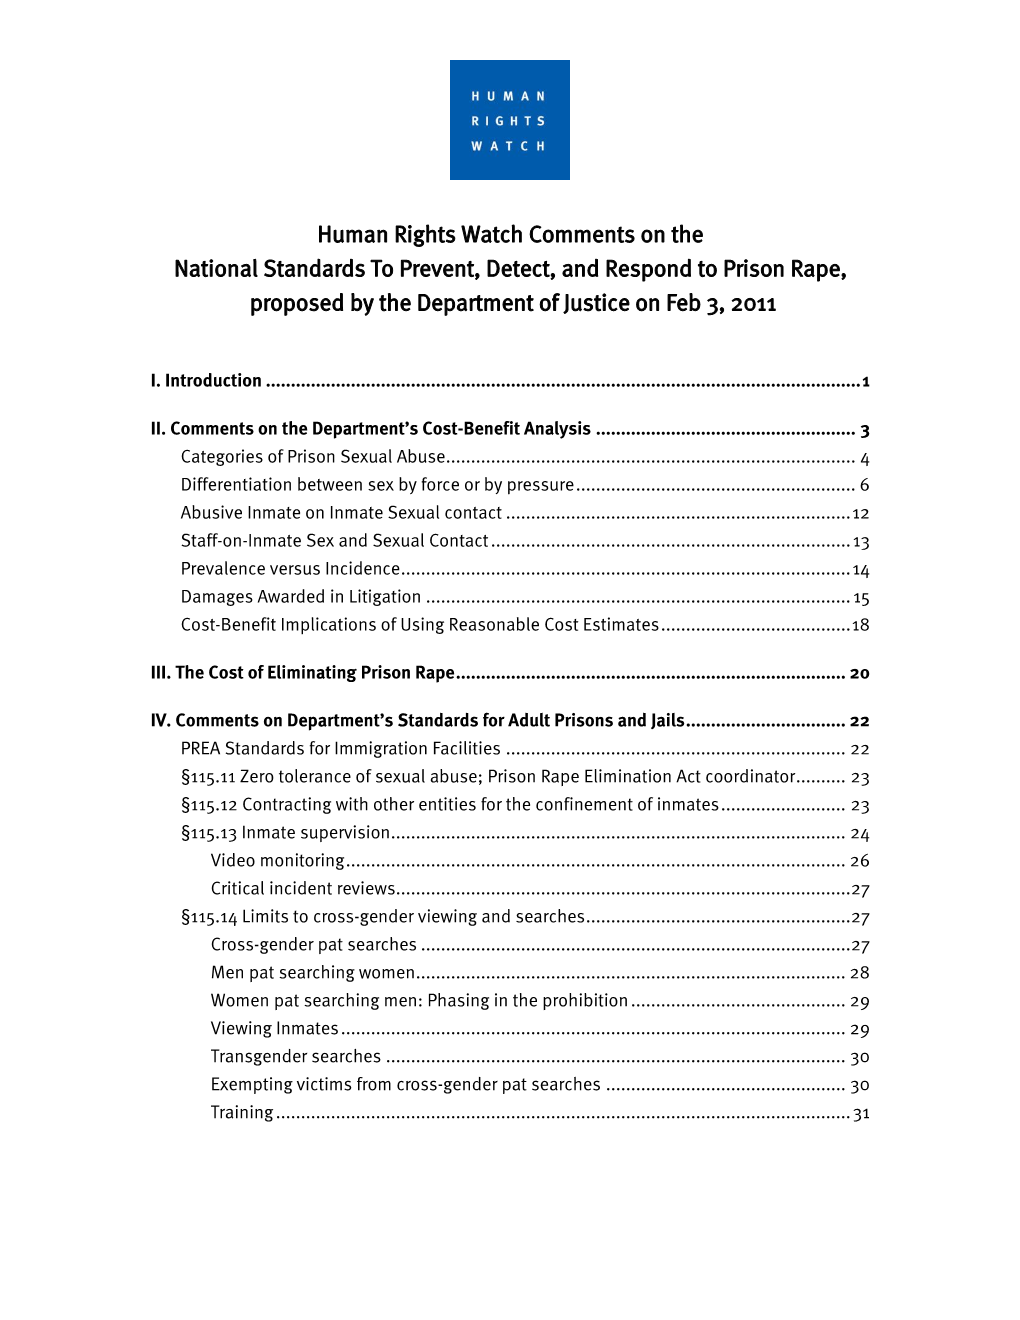 Human Rights Watch Comments on the National Standards to Prevent, Detect, and Respond to Prison Rape, Proposed by the Department of Justice on Feb 3, 2011